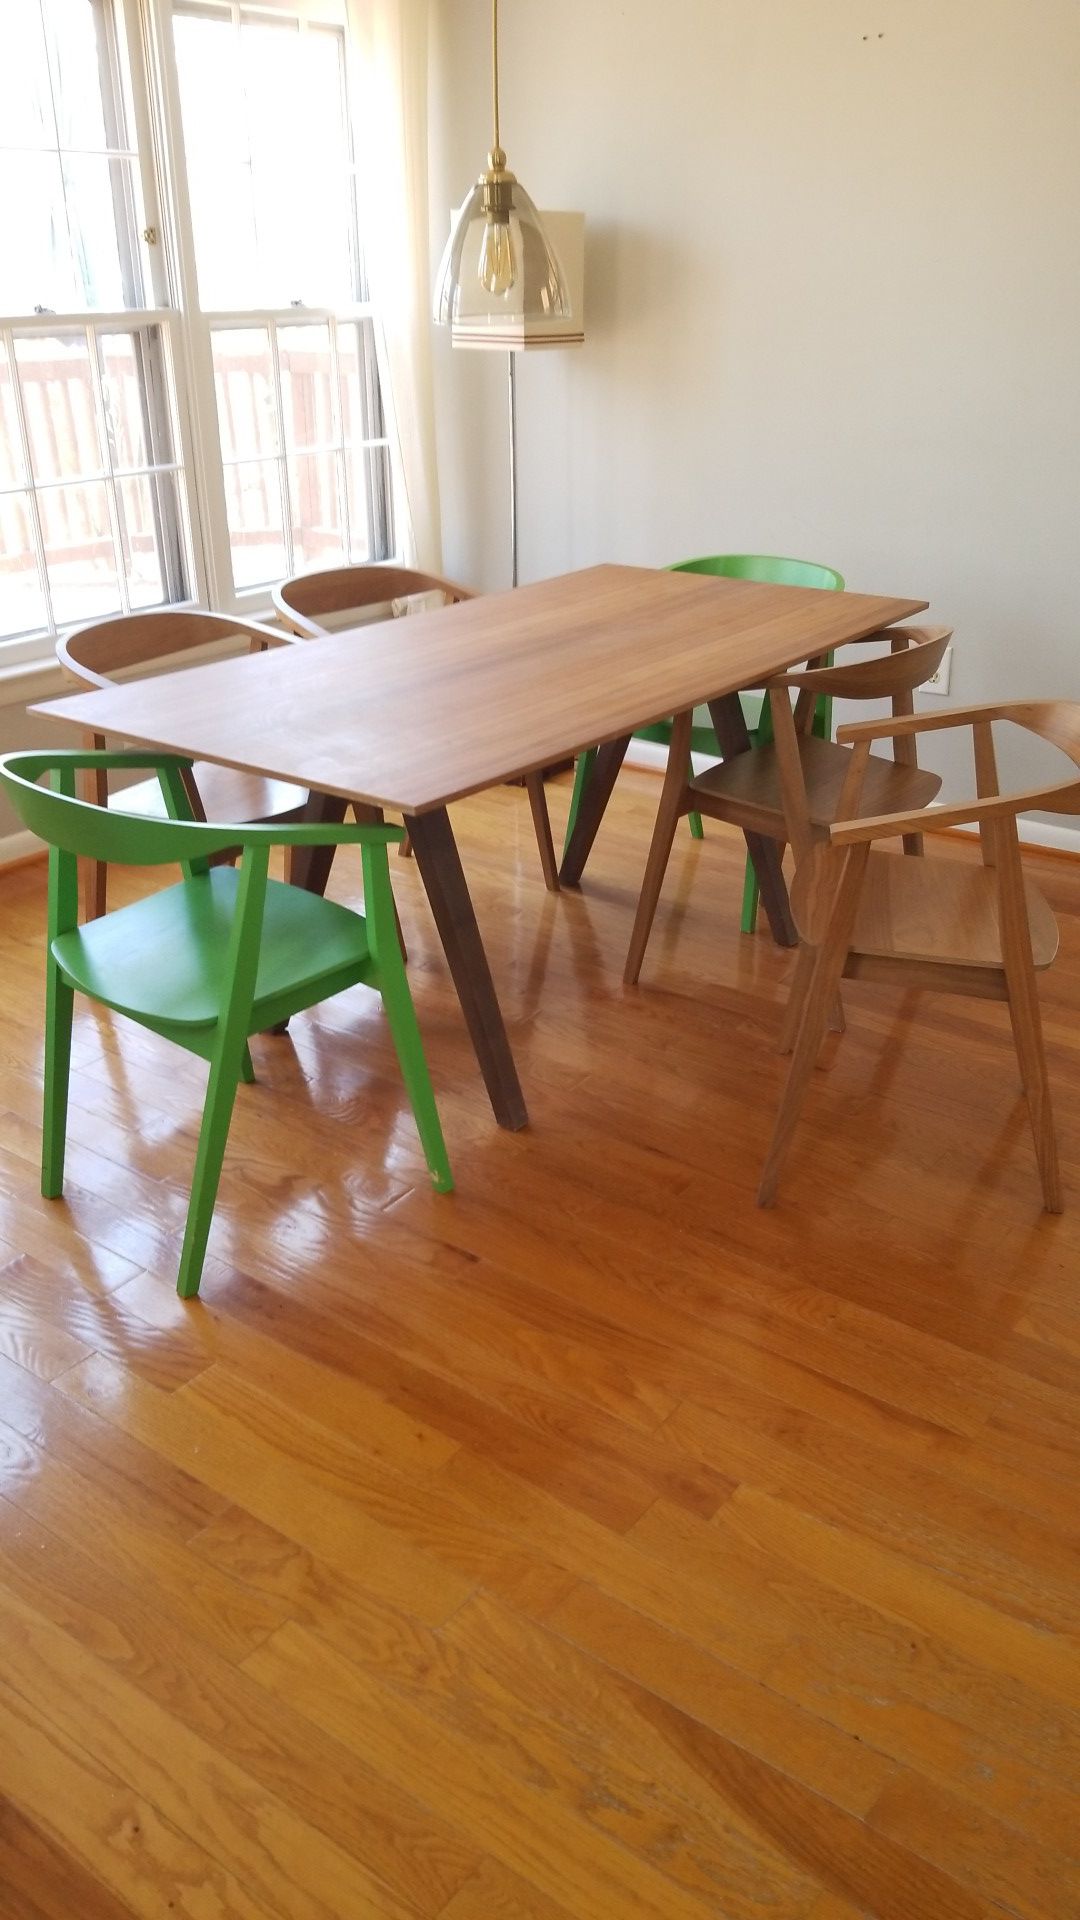 IKEA Stockholm dining table + 4 chairs